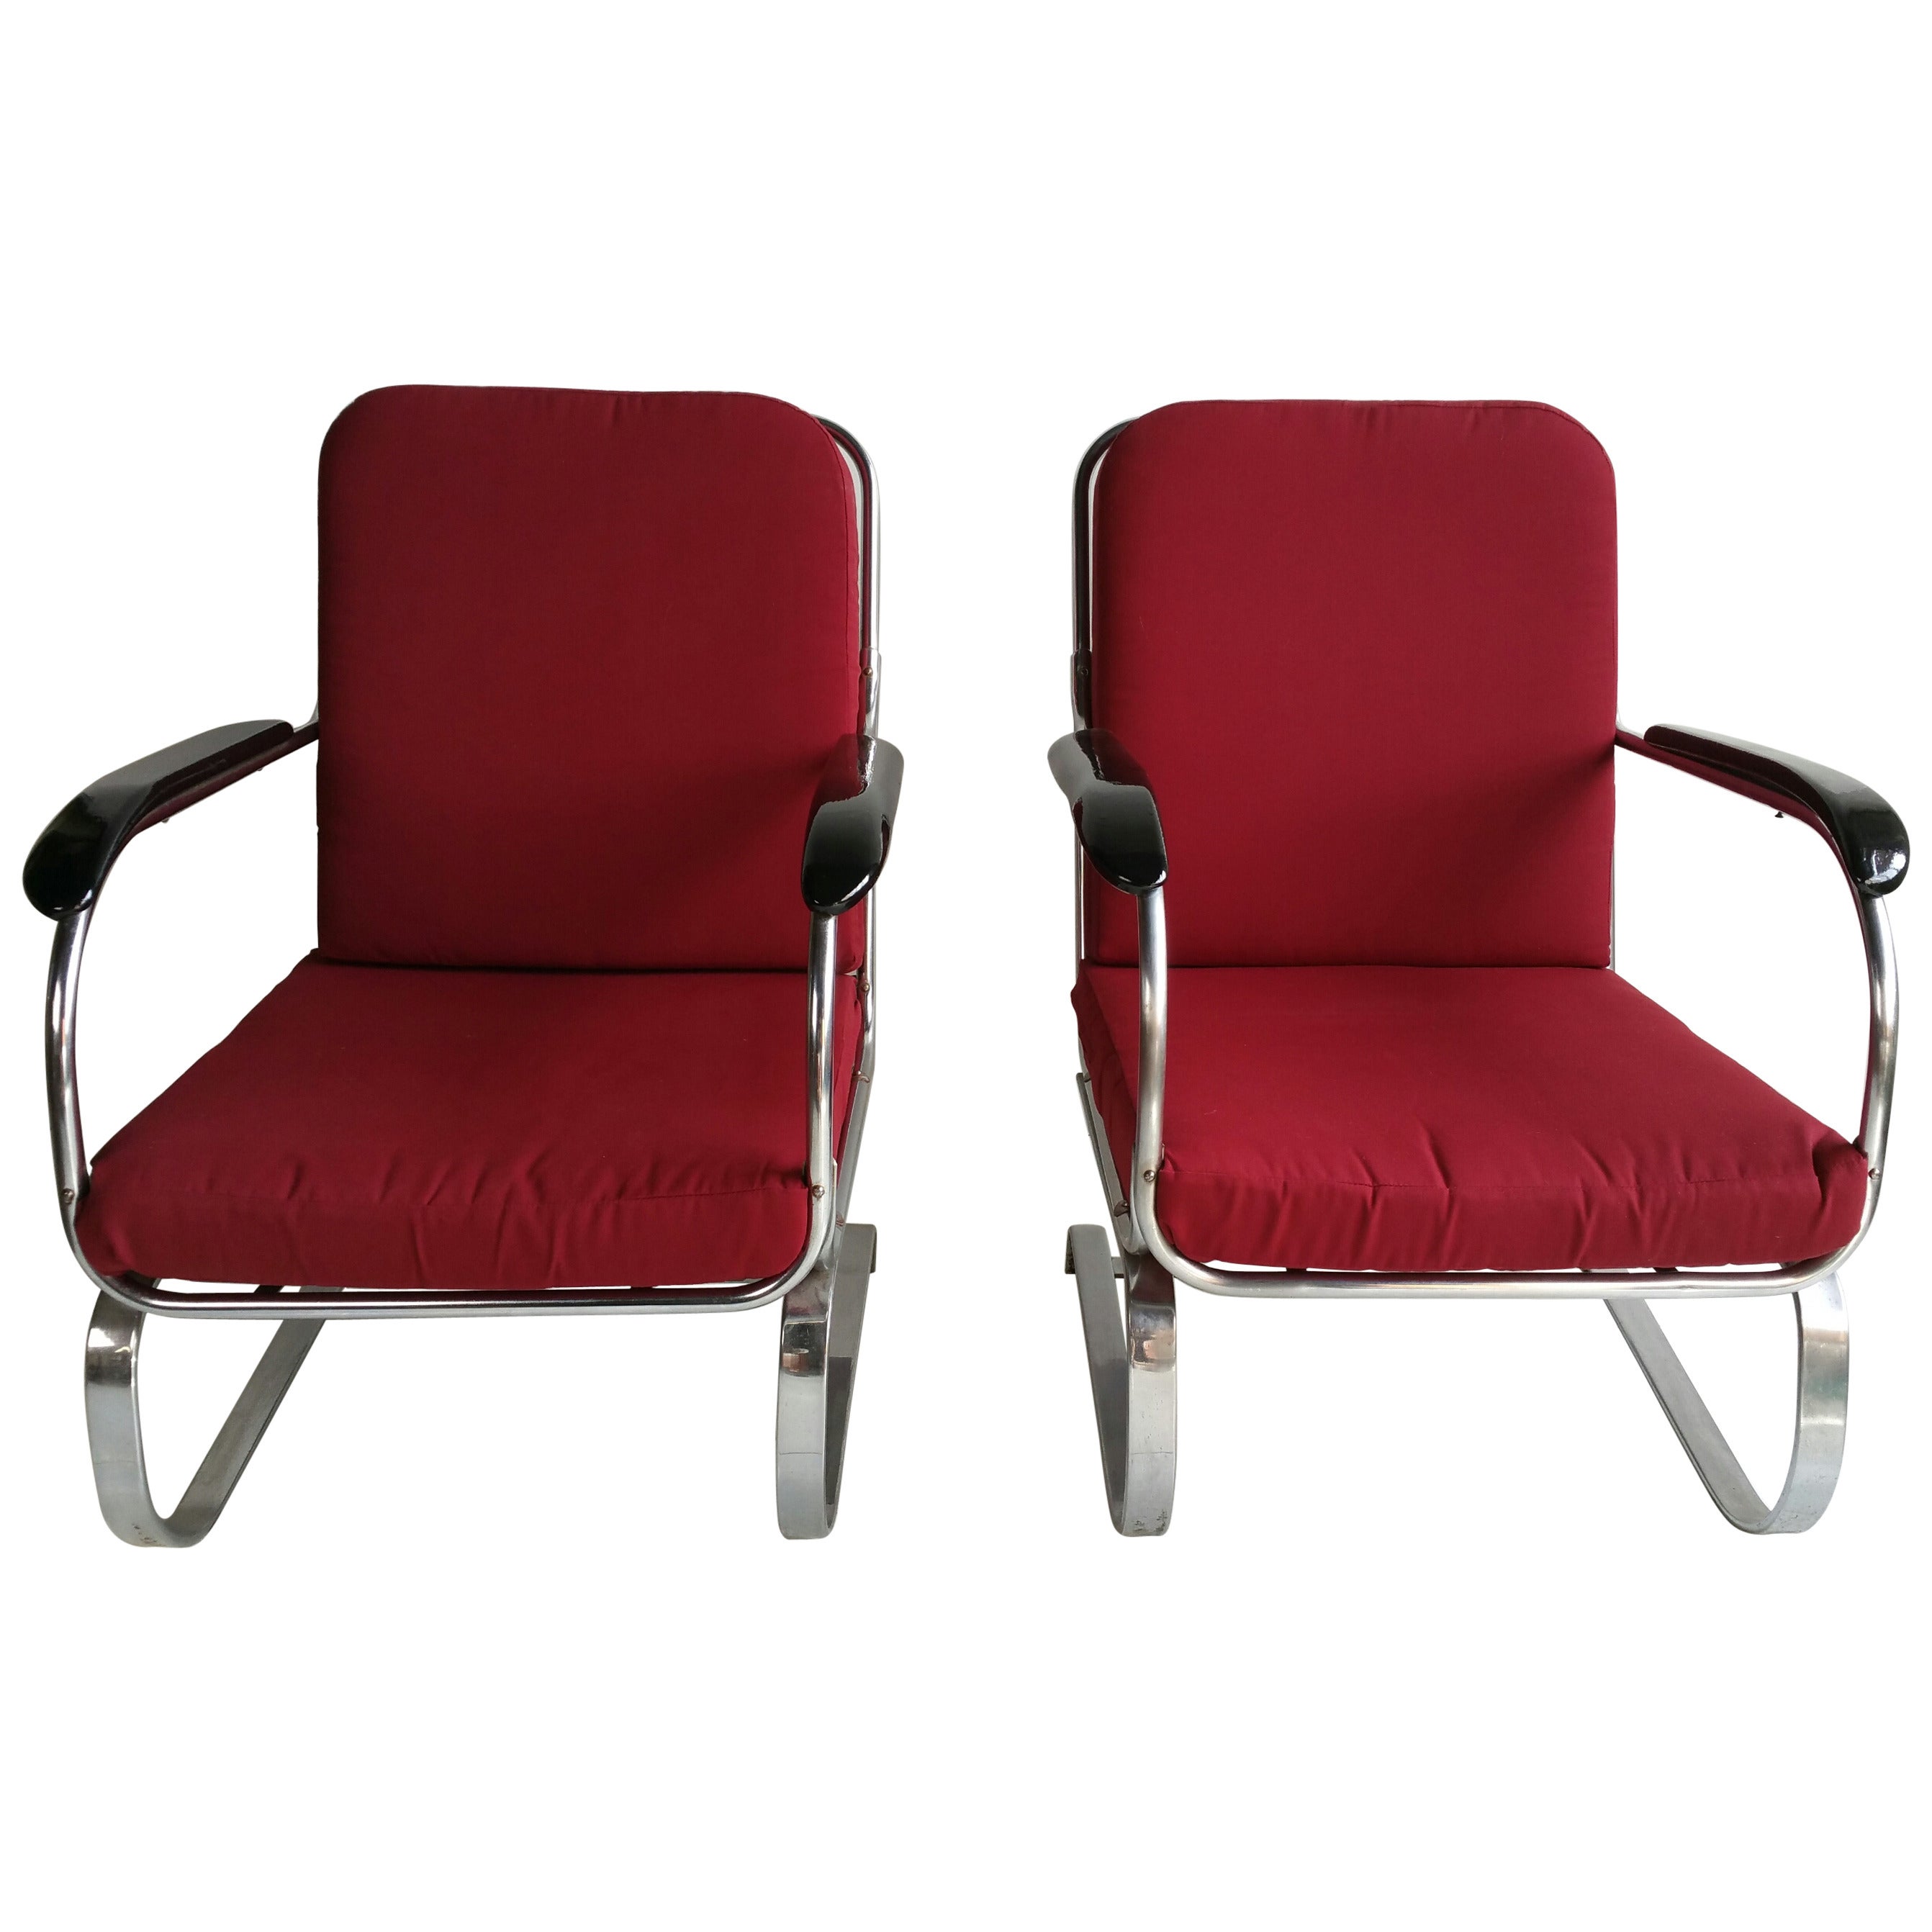 Matched pair Chromed Steel Art Deco Springer Chairs, , LLoyd Mnfg Co. For Sale